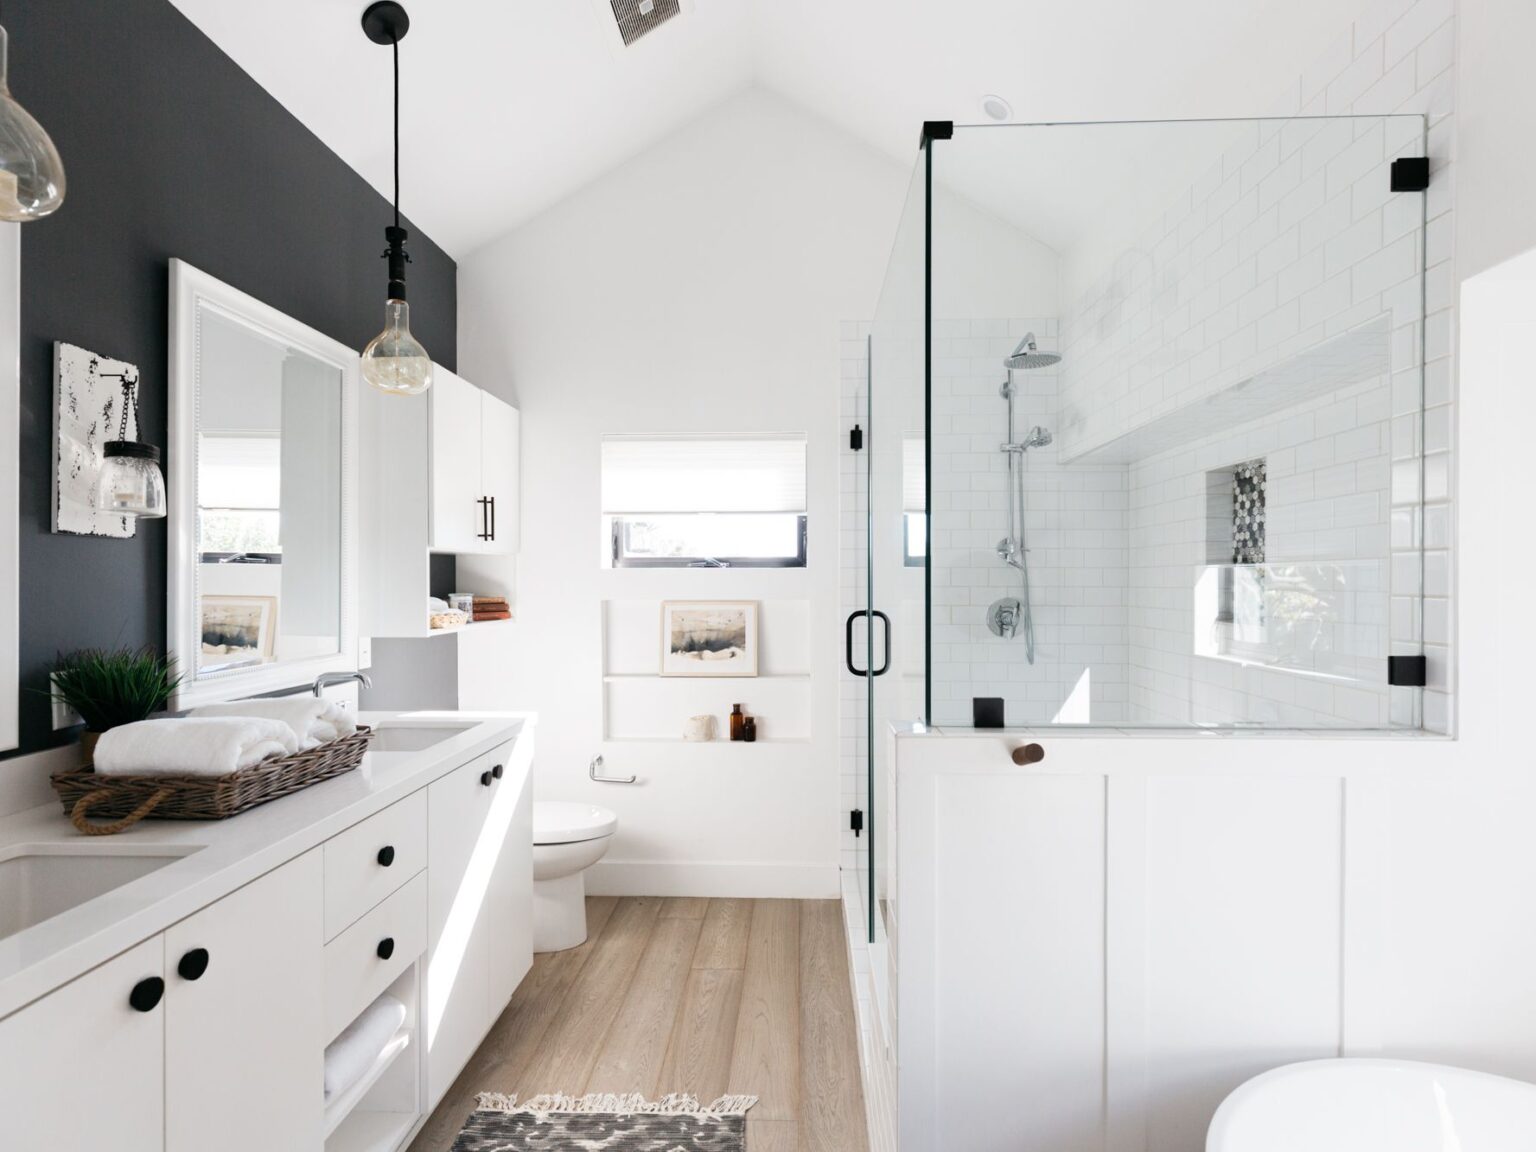 Do you want a house that looks gorgeous but is also incredibly easy to clean and maintain? Use these amazing bathroom designs to your advantage.